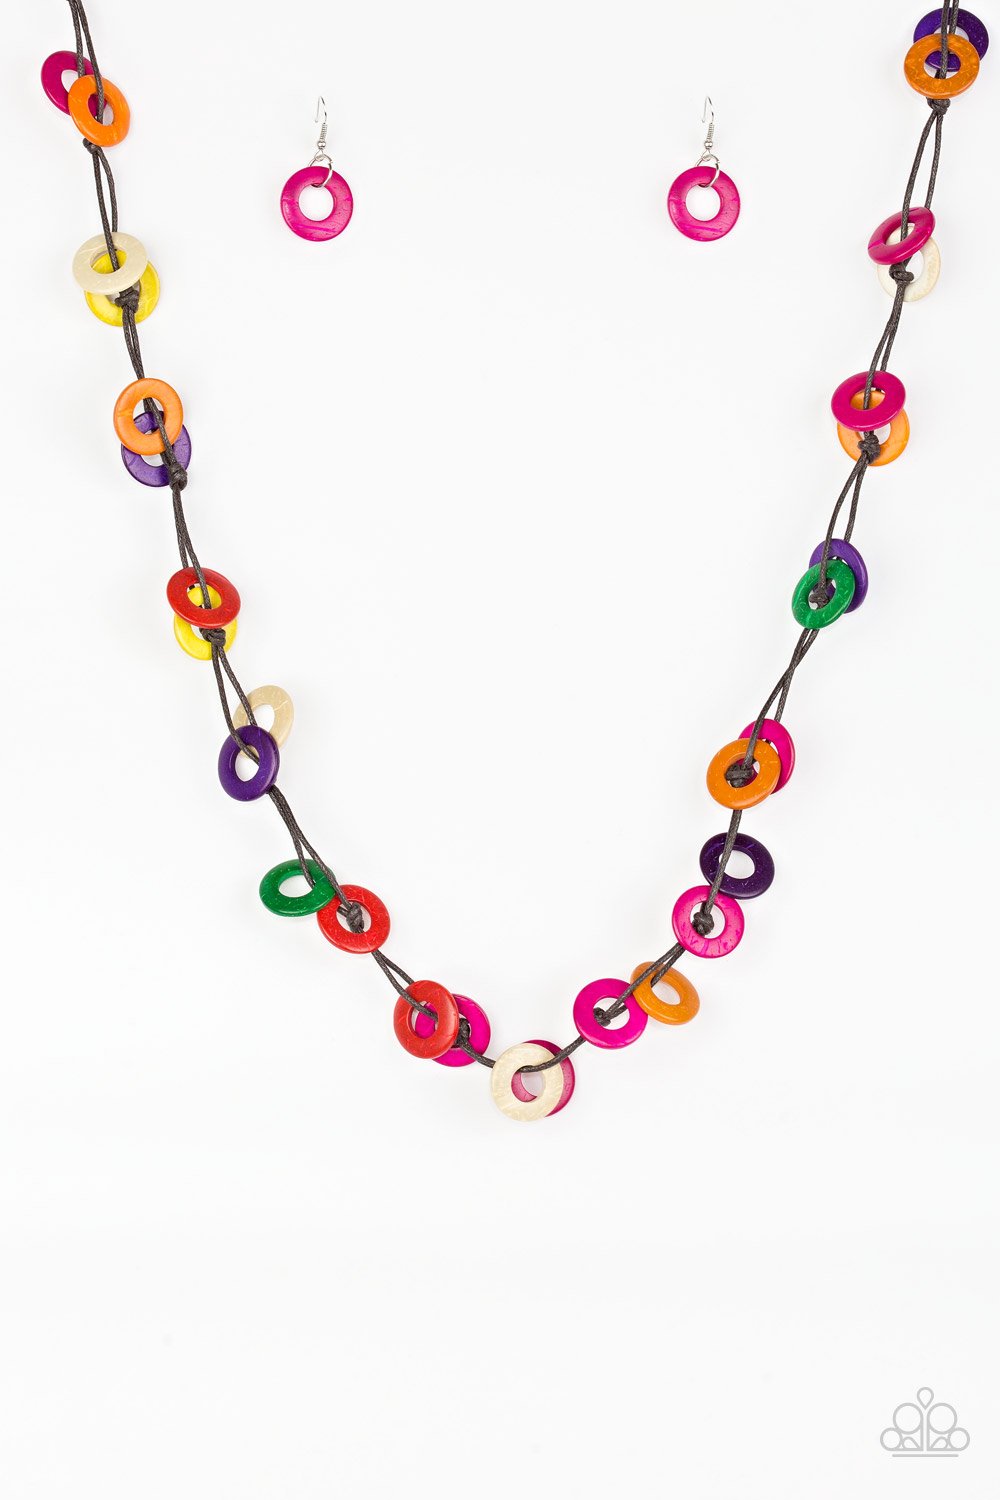 Waikiki Winds - Multi-Color Wooden Necklace Paparazzi